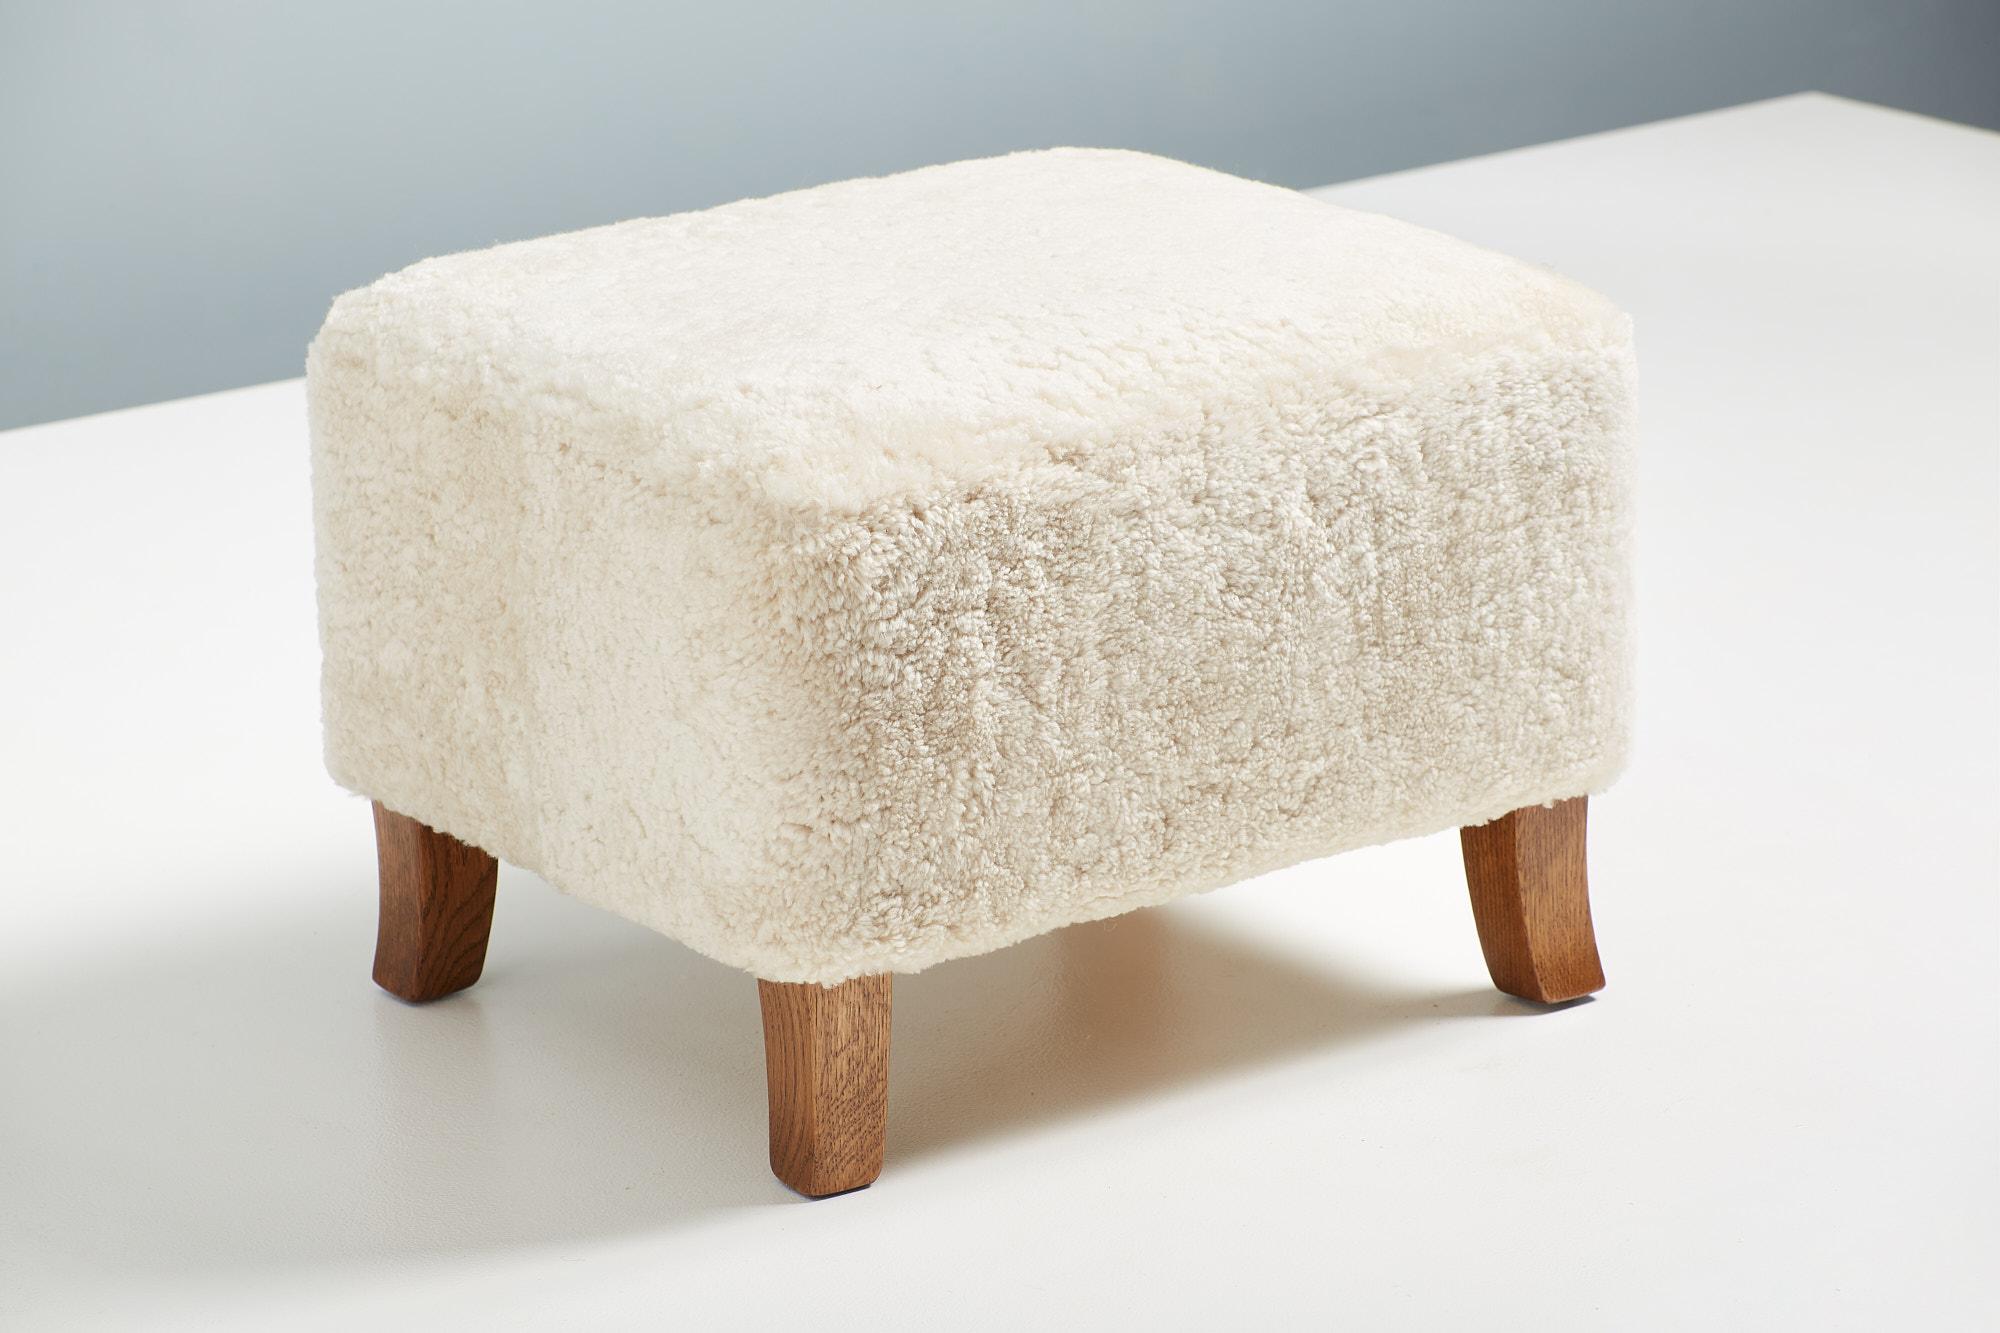 Dagmar Design - Sampo Ottoman

A custom-made ottoman designed & produced at our workshops in London using the highest quality materials. This example is upholstered in Moonlight sheepskin with carved feet in fumed oak. This ottoman is available to